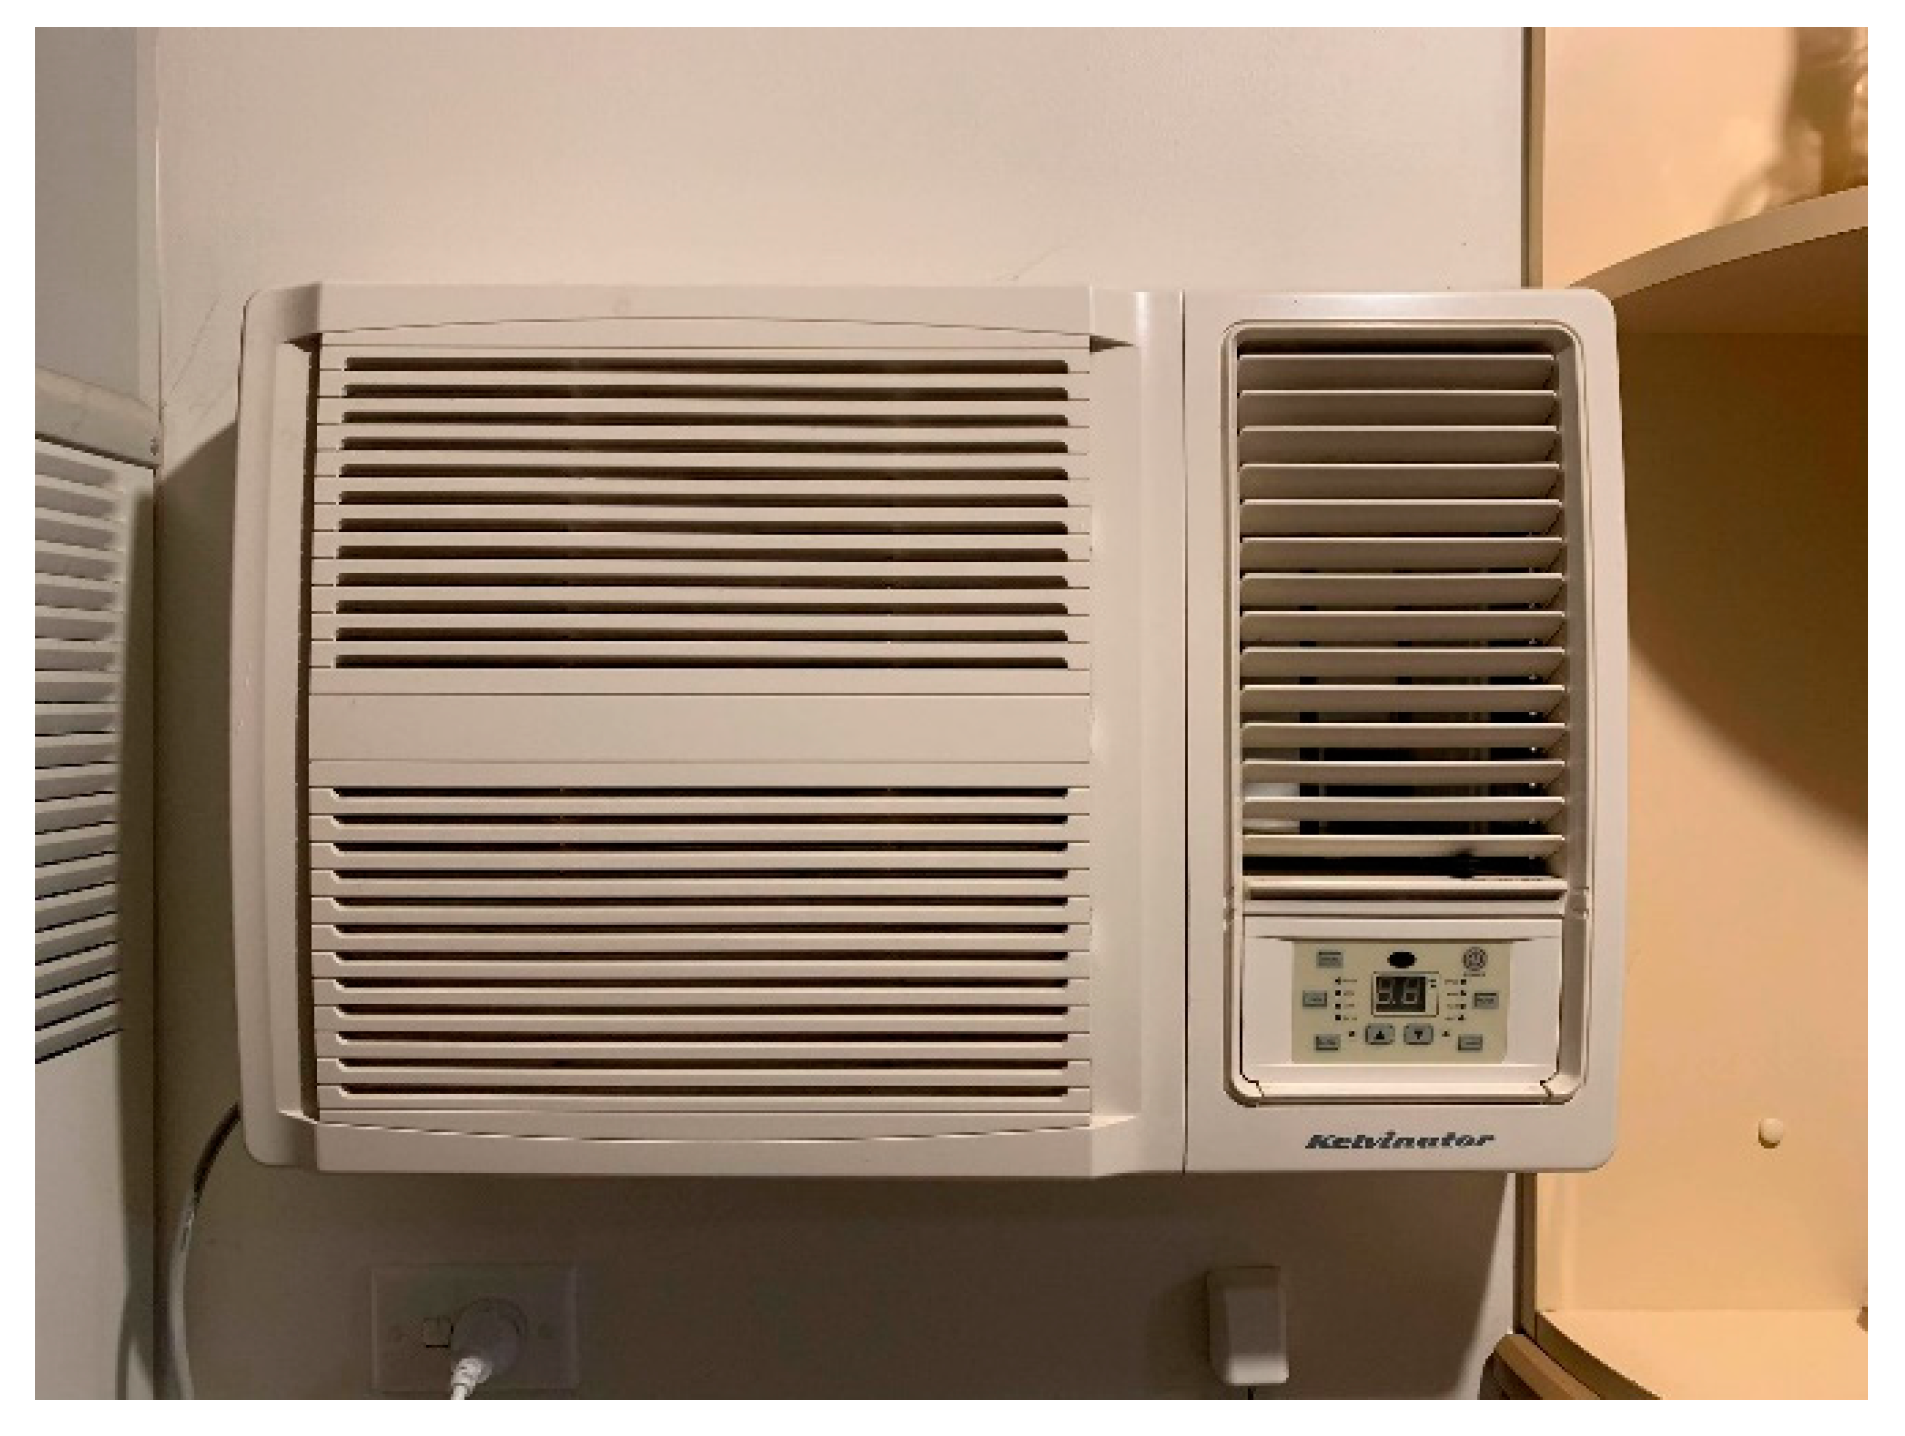 heating - How can I retrofit this existing wall-heater with an external  thermostat? - Home Improvement Stack Exchange